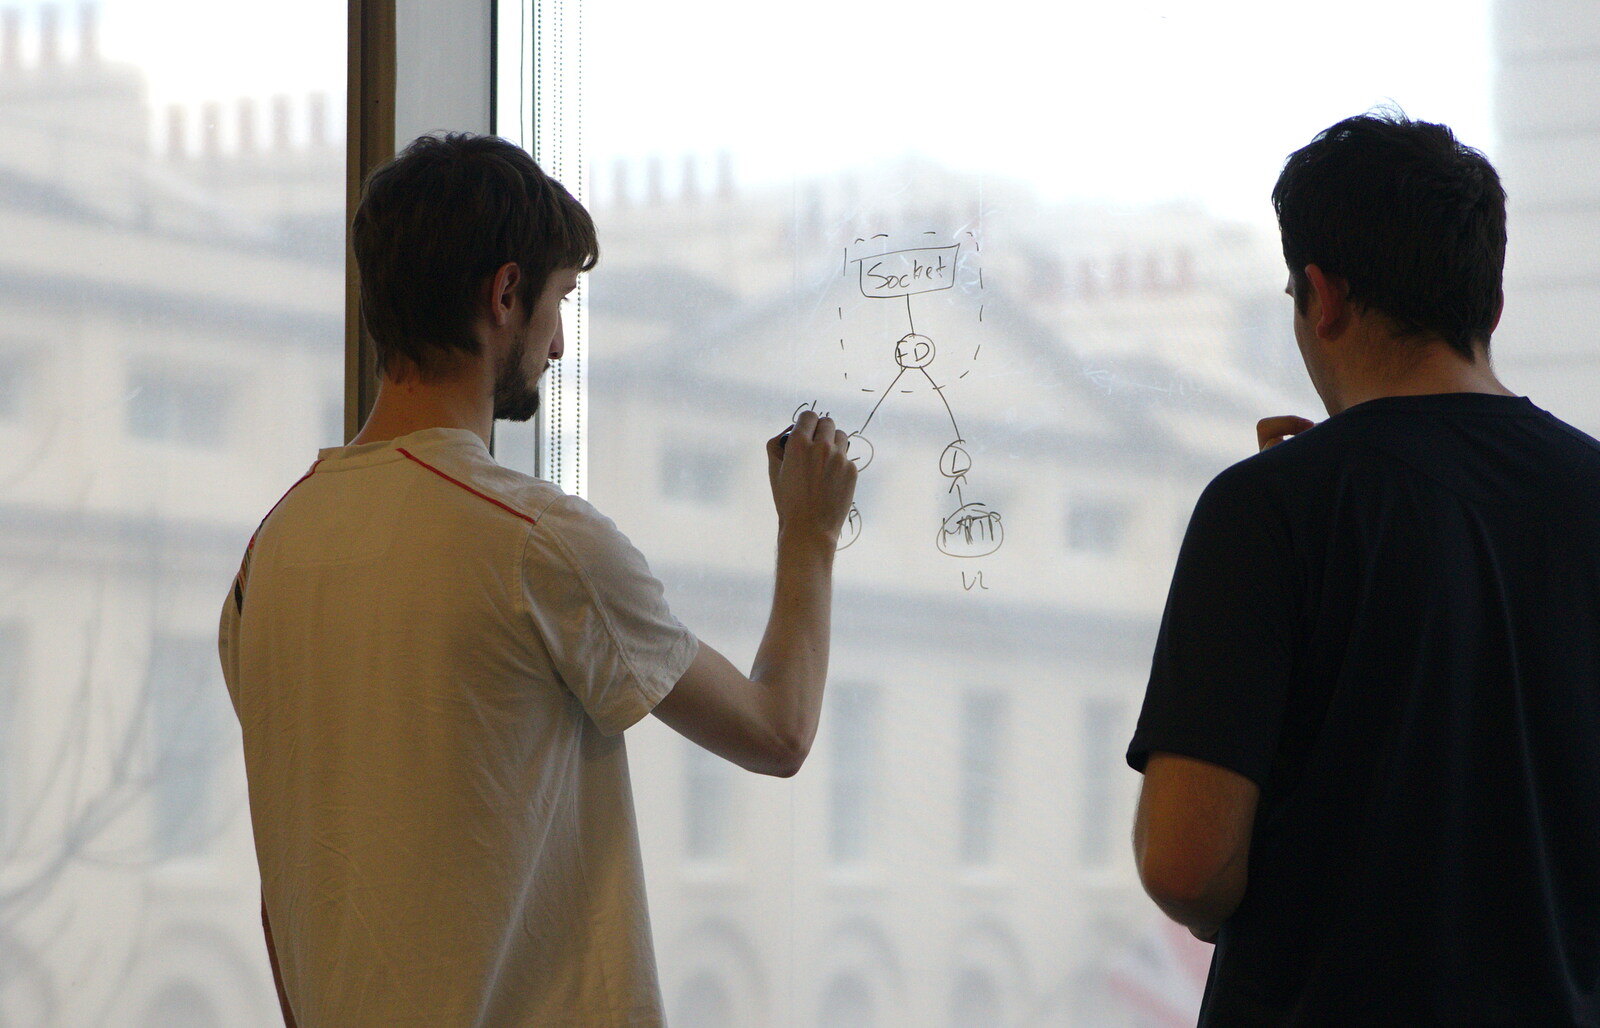 Network diagrams are drawn on the windows from SwiftKey Innovation, The Hub, Westminster, London - 21st February 2014